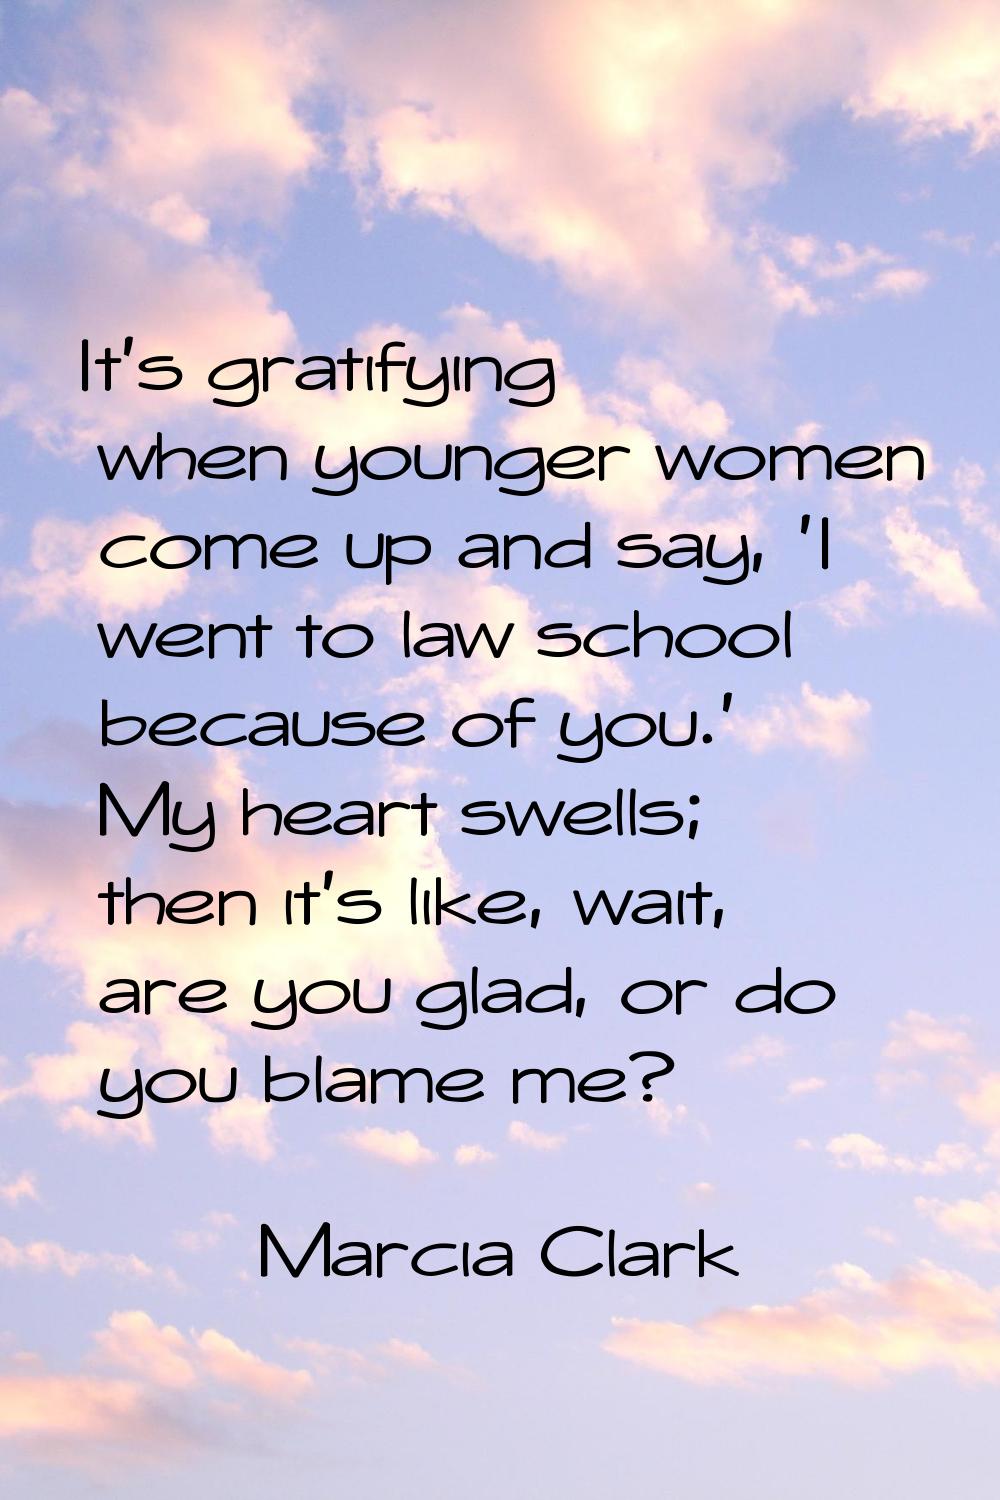 It's gratifying when younger women come up and say, 'I went to law school because of you.' My heart